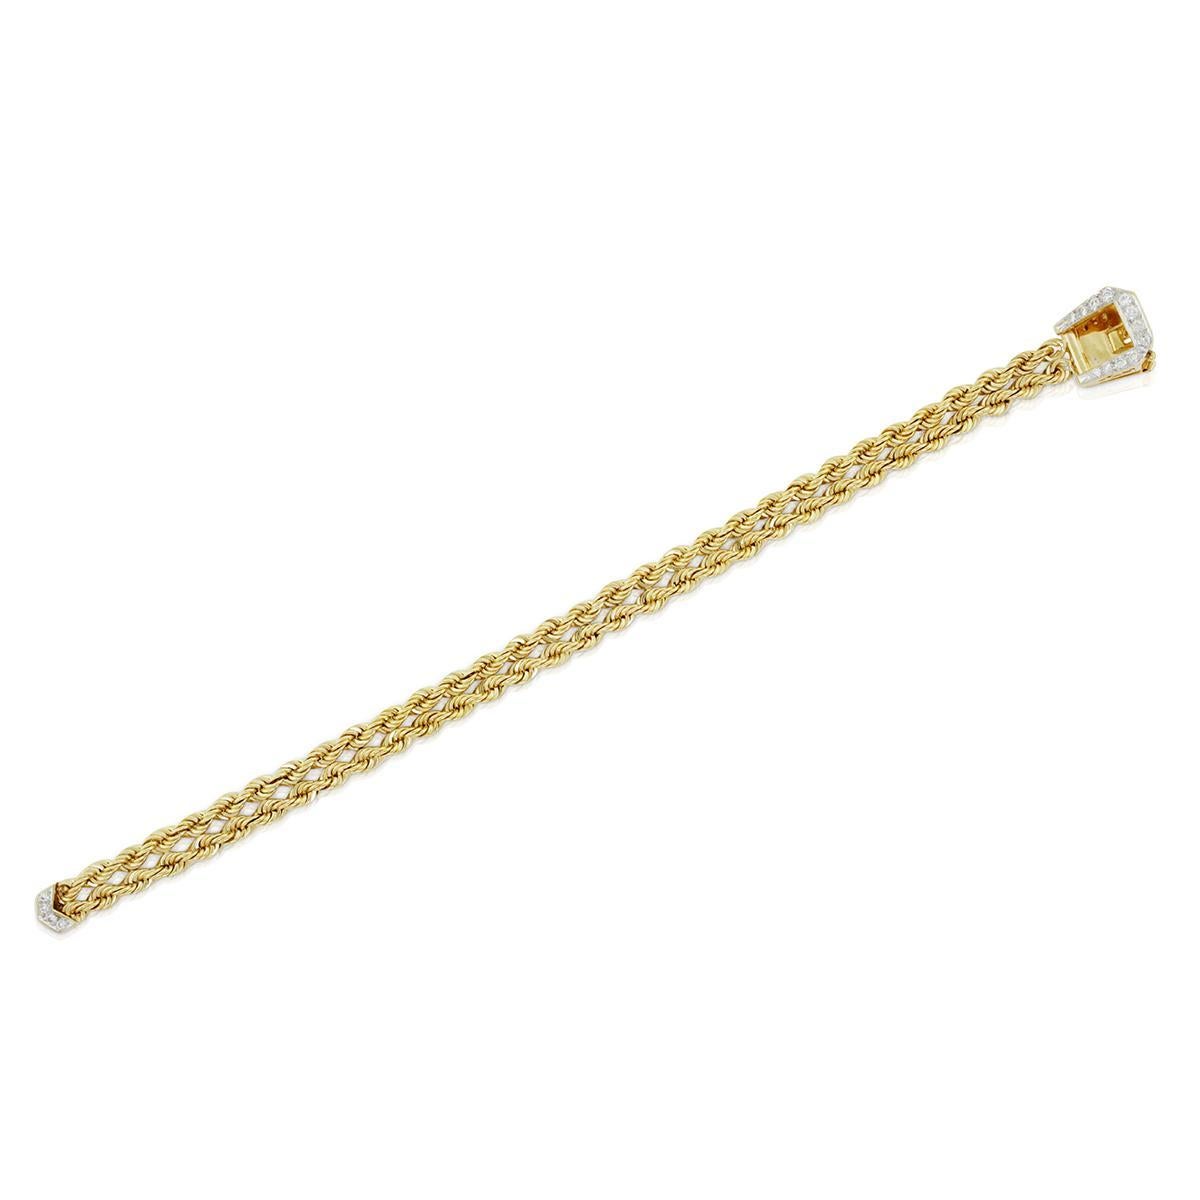 Luxe and ultra-comfortable on the wrist, fine woven mesh bracelet flashes diamonds on the lock. This unique piece is crafted in 14k yellow gold. The buckle is set with round cut diamonds. Total carat weight: 0.36. Length: 7 inches. Total weight: